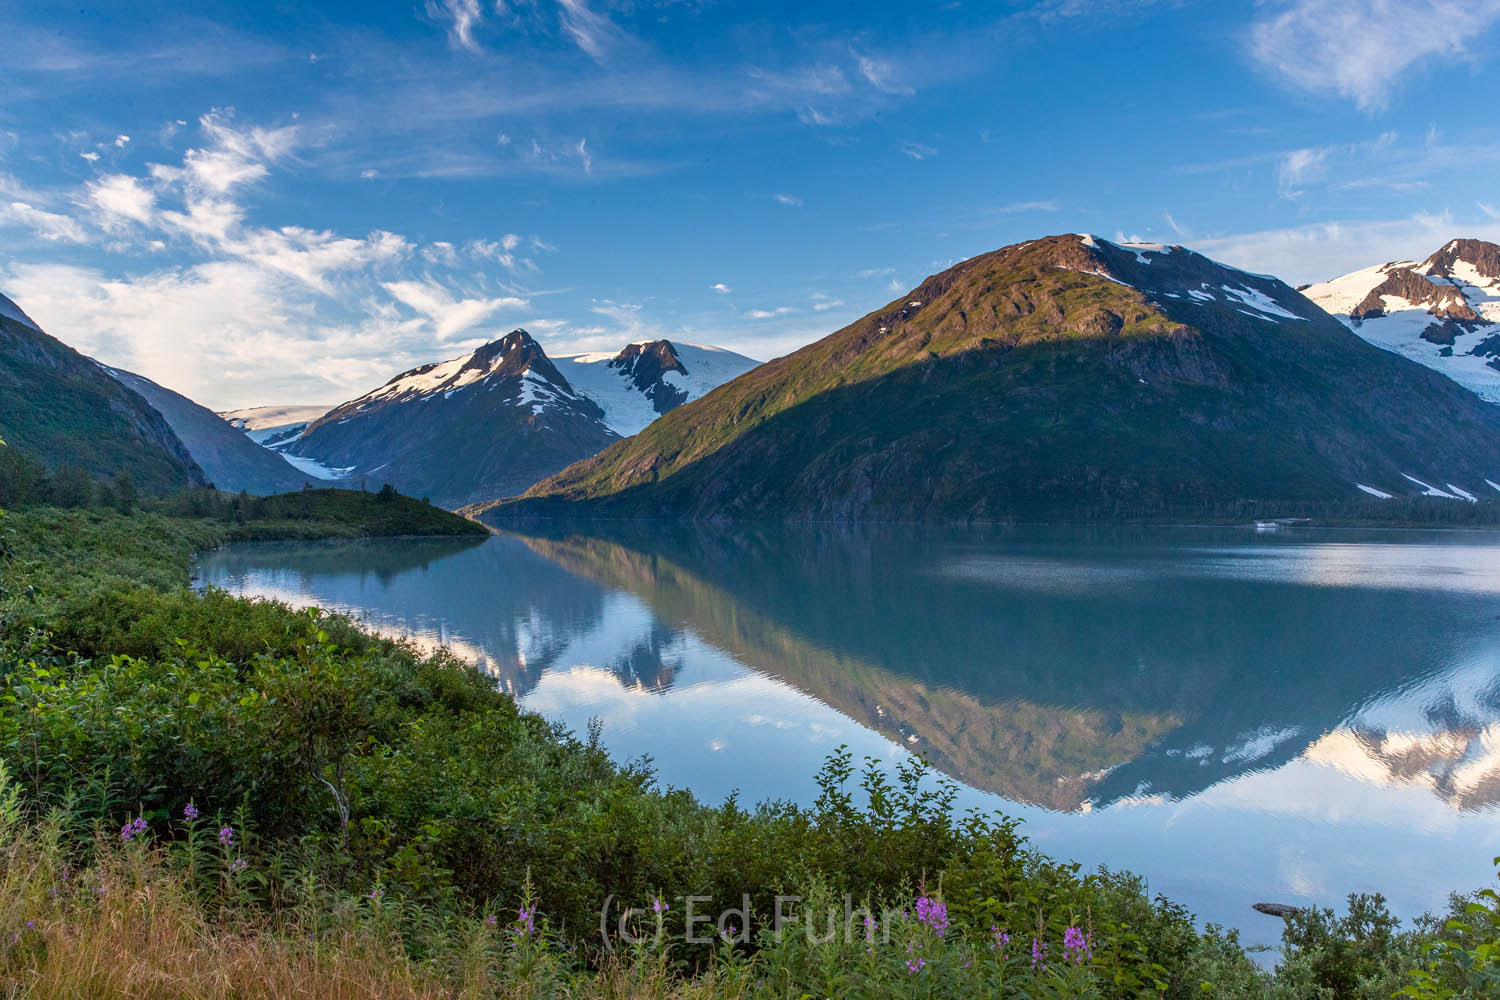 Retreating Portage Glacier can be seen in the left as sunrise hits the peaks across Portage Lake.